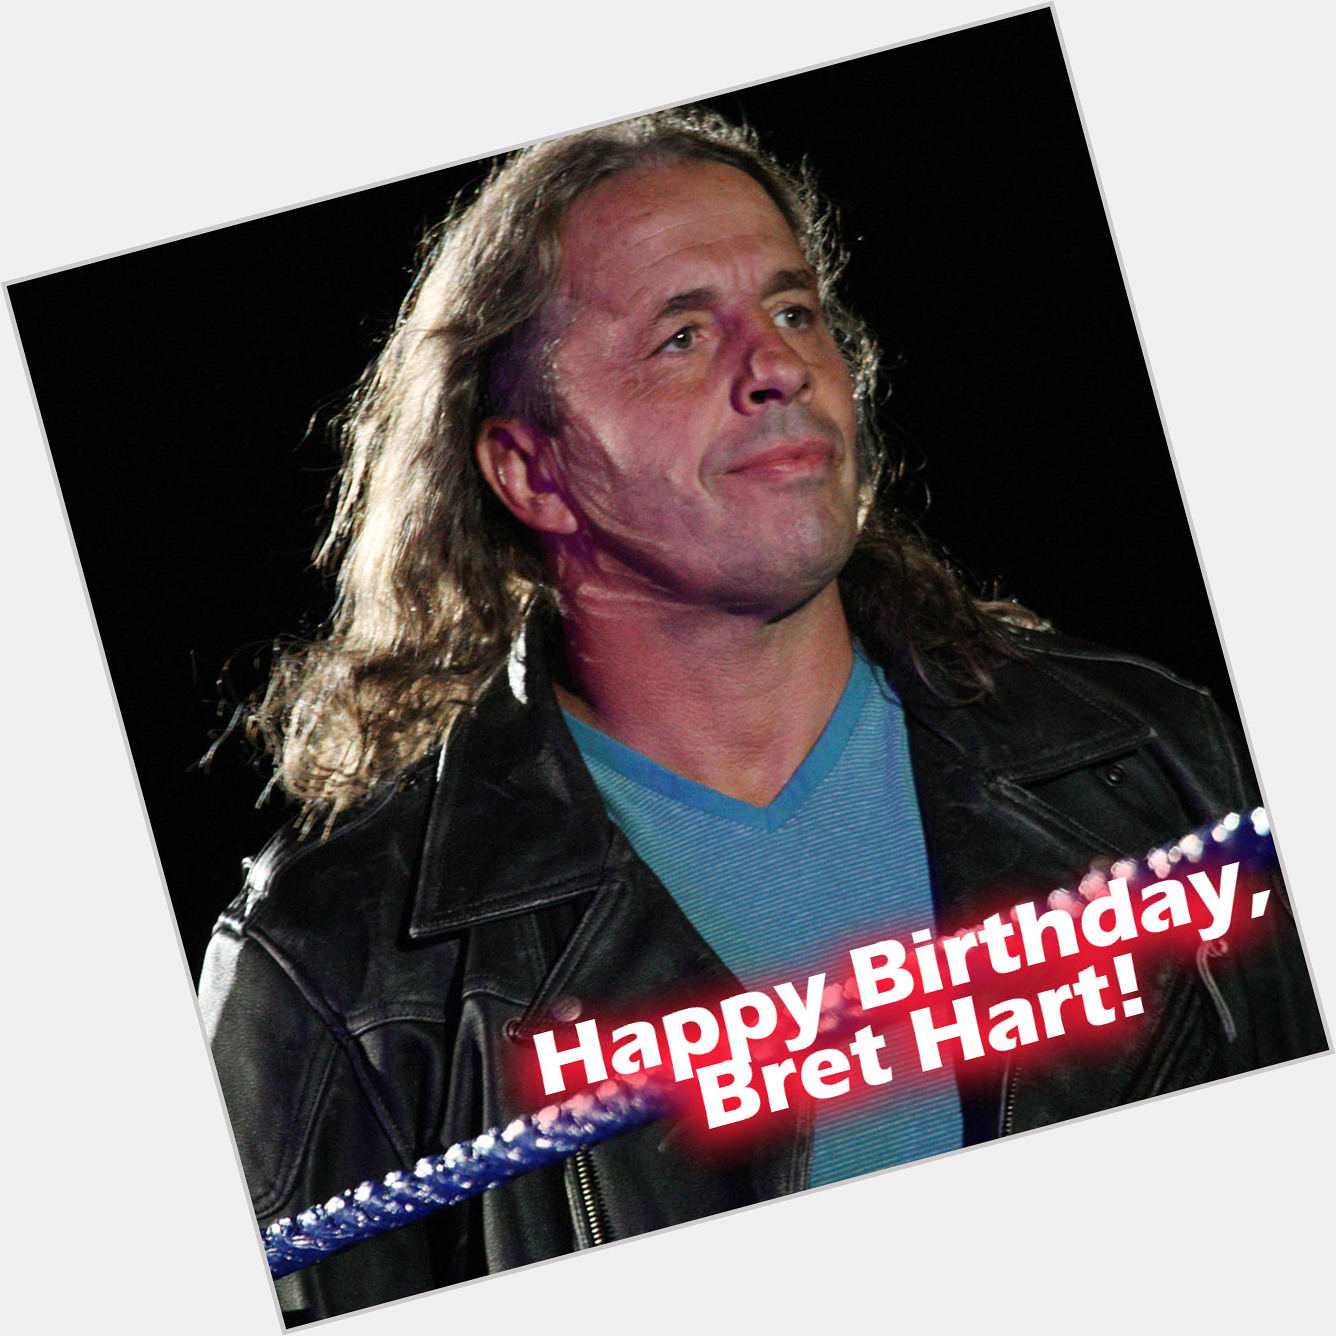 Happy Birthday, Bret Hart! The retired wrestler is 63 years old today. Join us in wishing \"Hitman\" a wonderful day. 